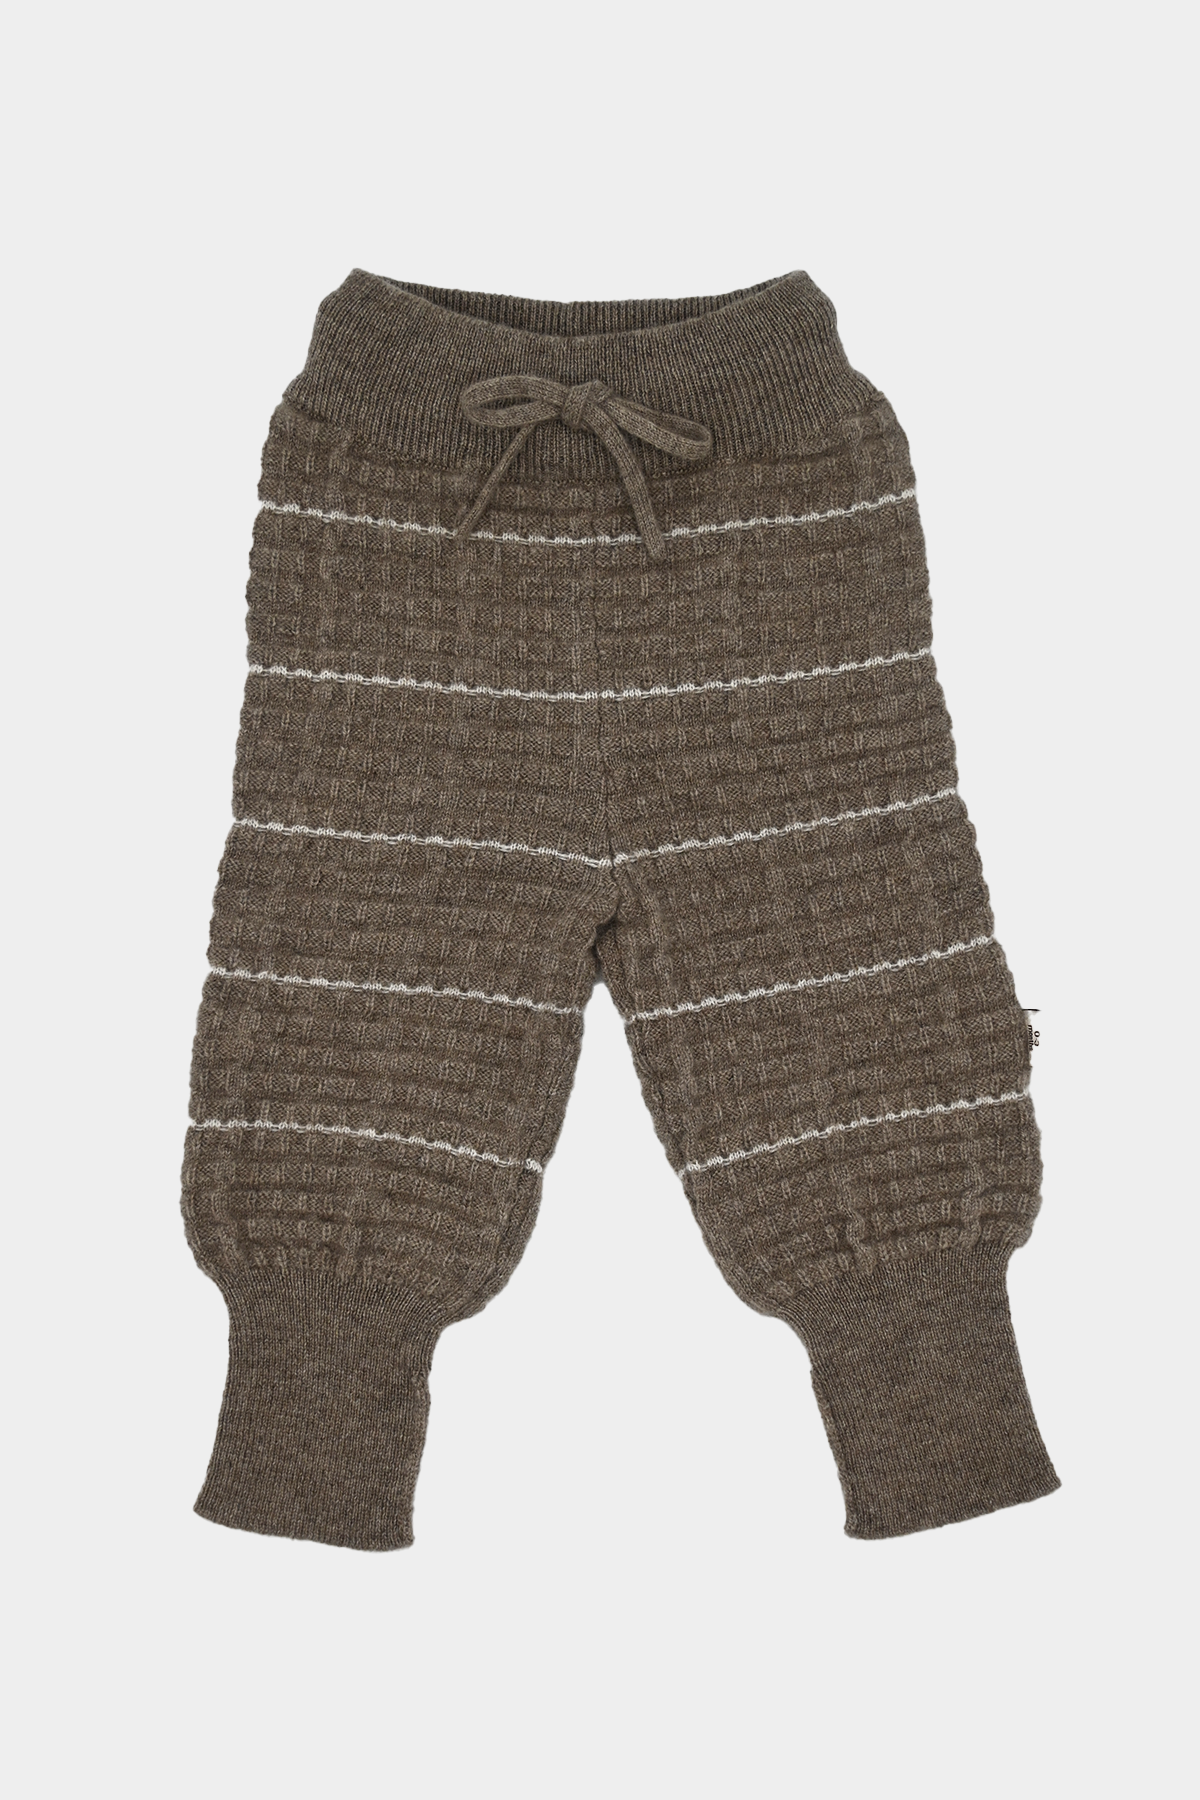 Stripped Baby Cashmere Pants